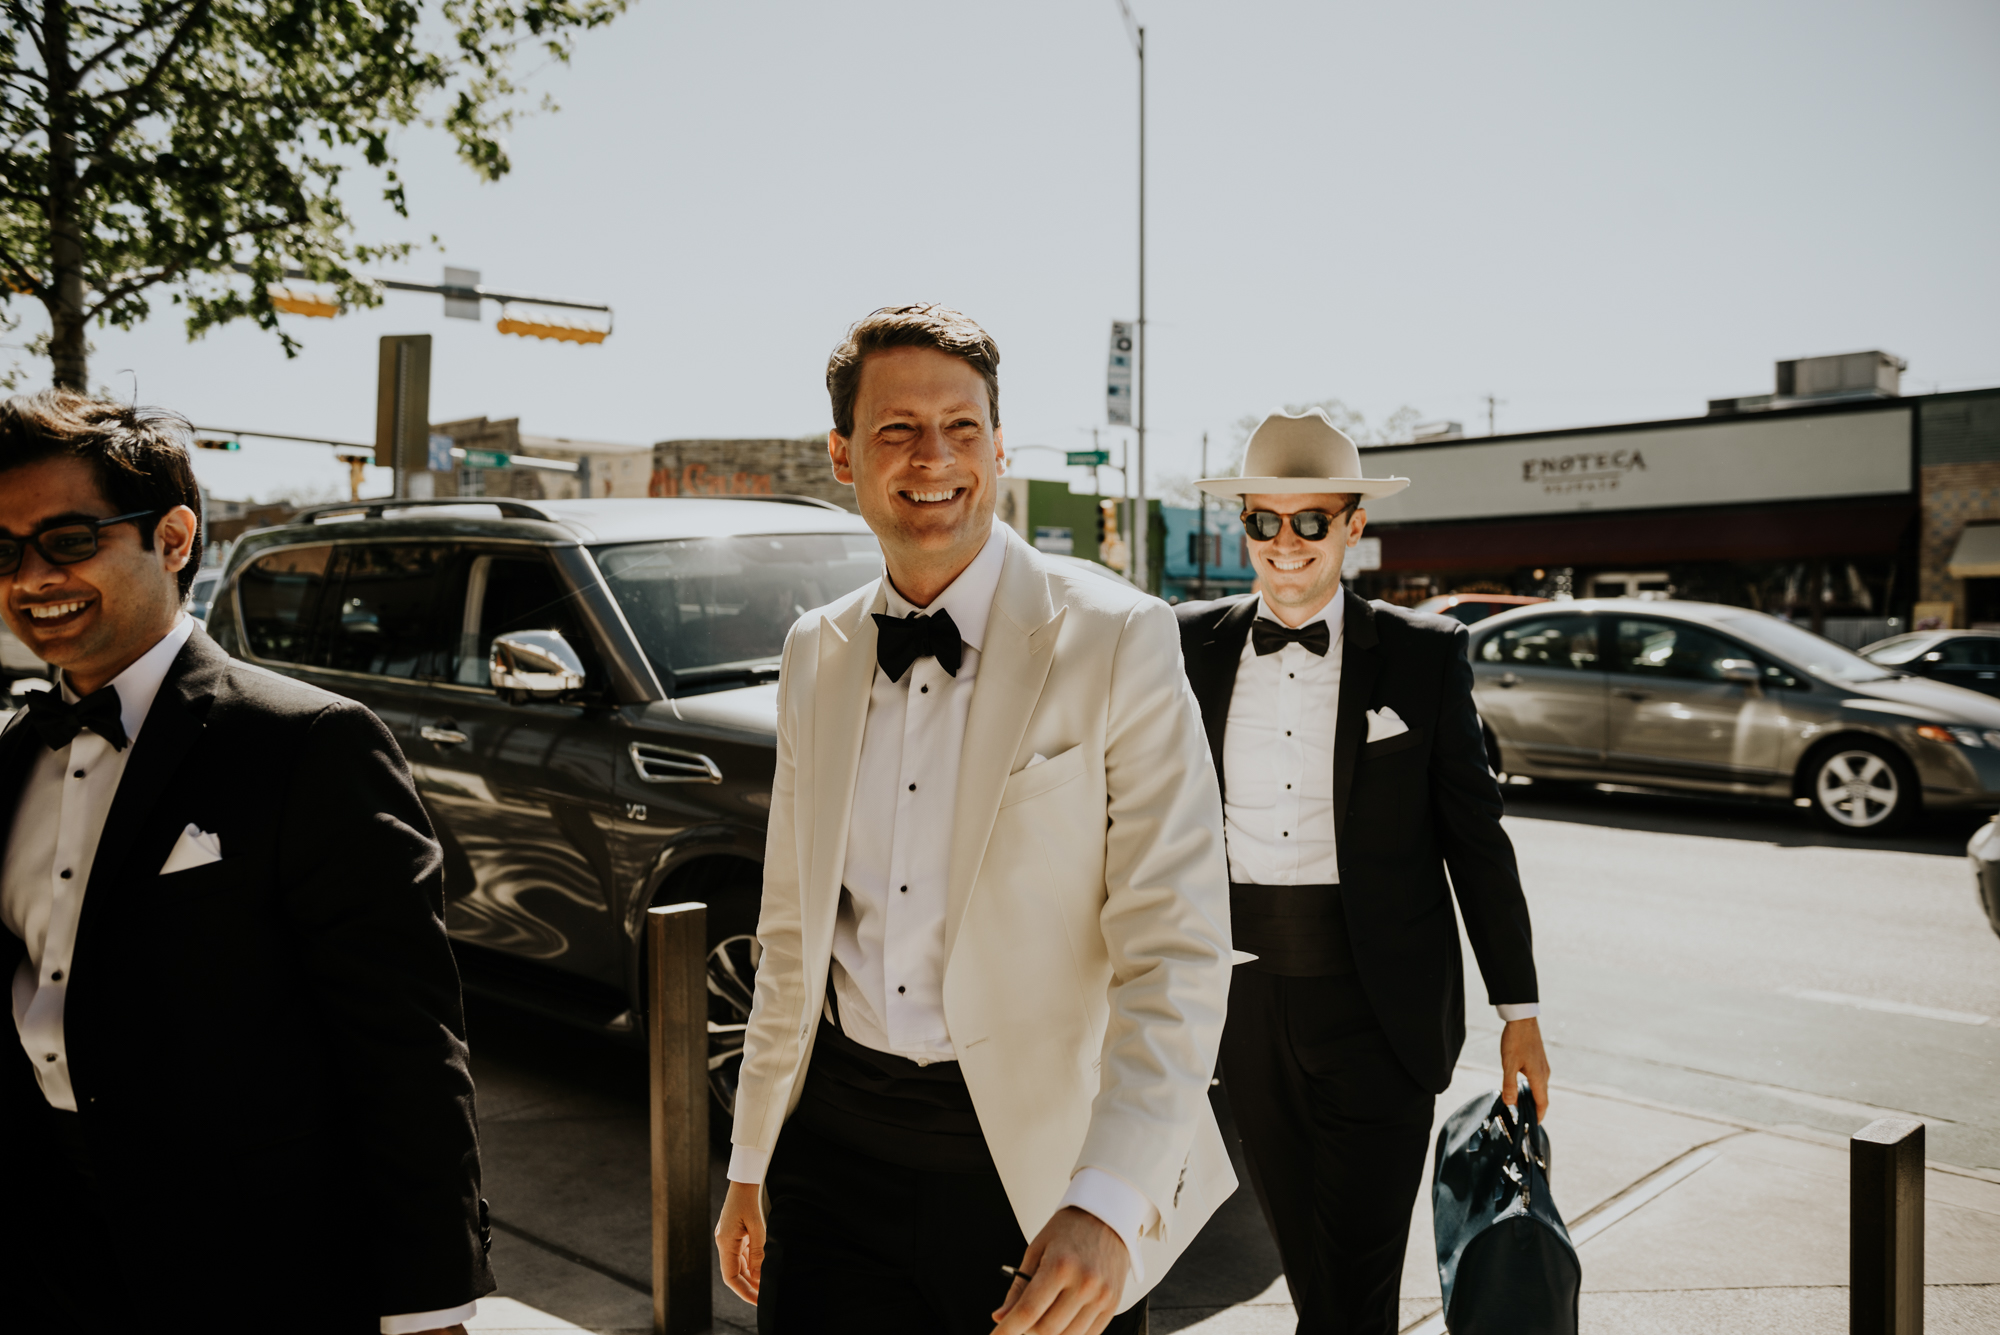 Groom and friends during an Intimate Wedding at South Congress Hotel in Austin, Texas